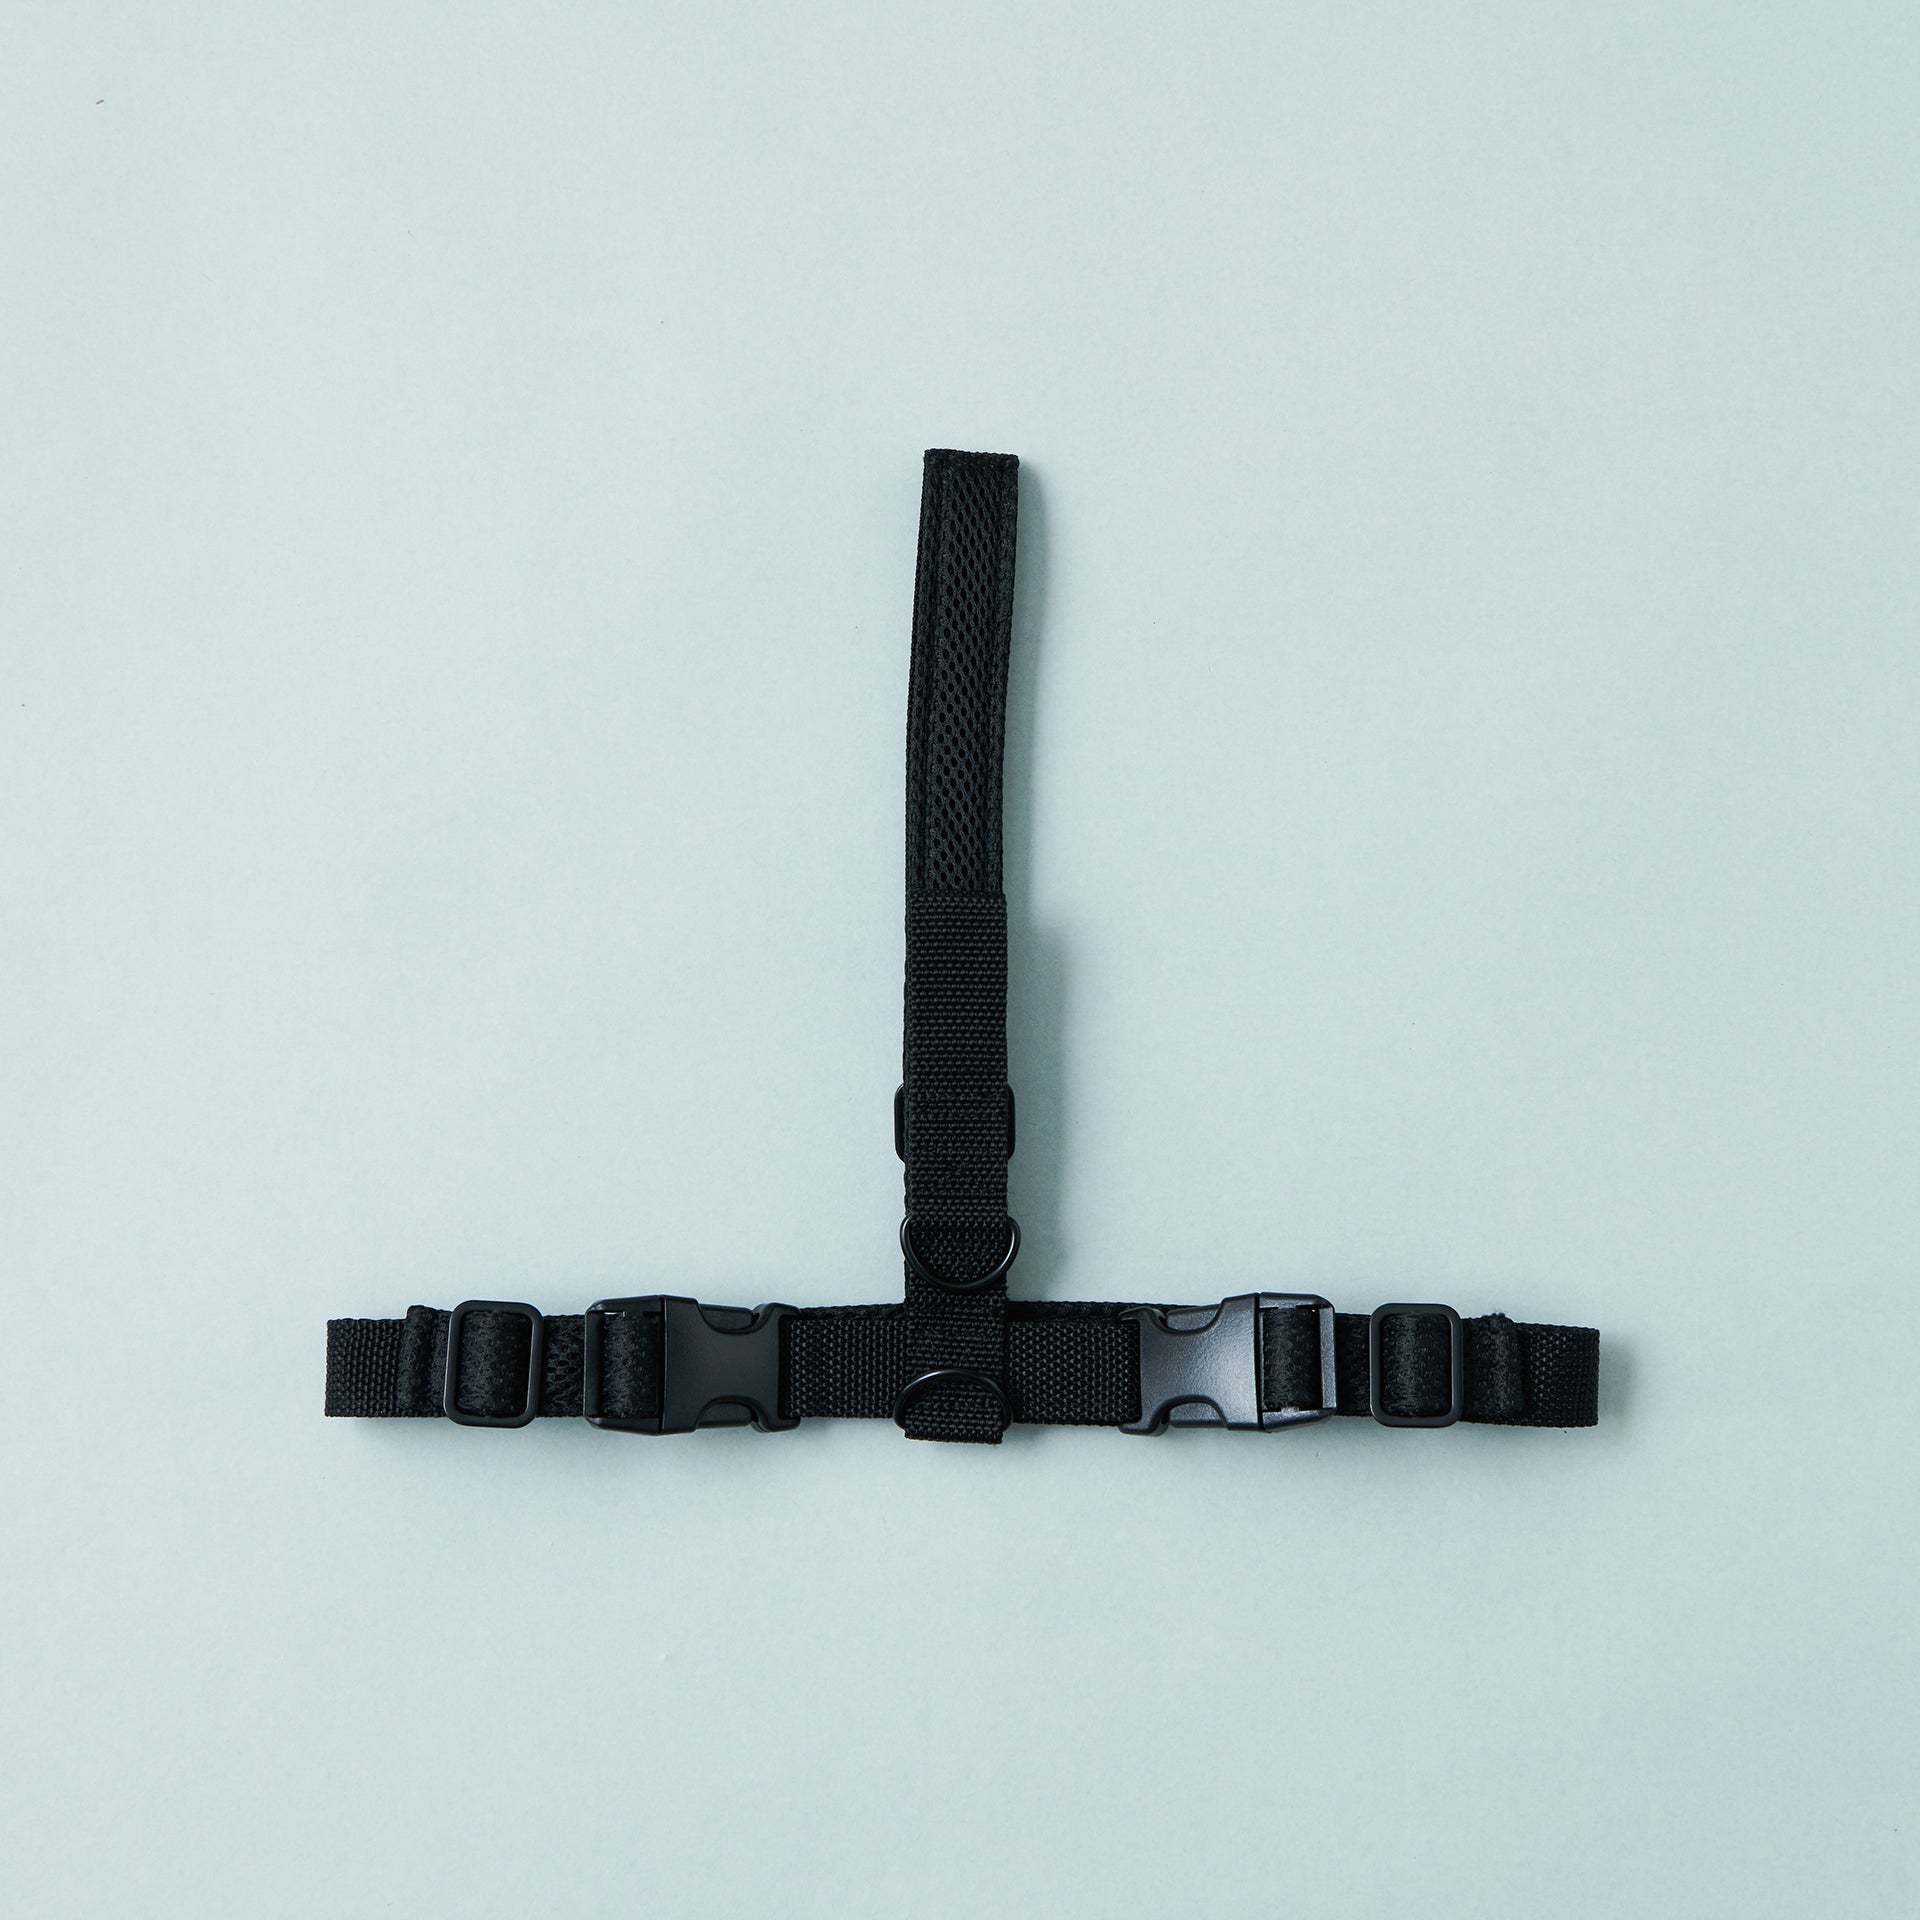 yama paws / 1°0 harness extender